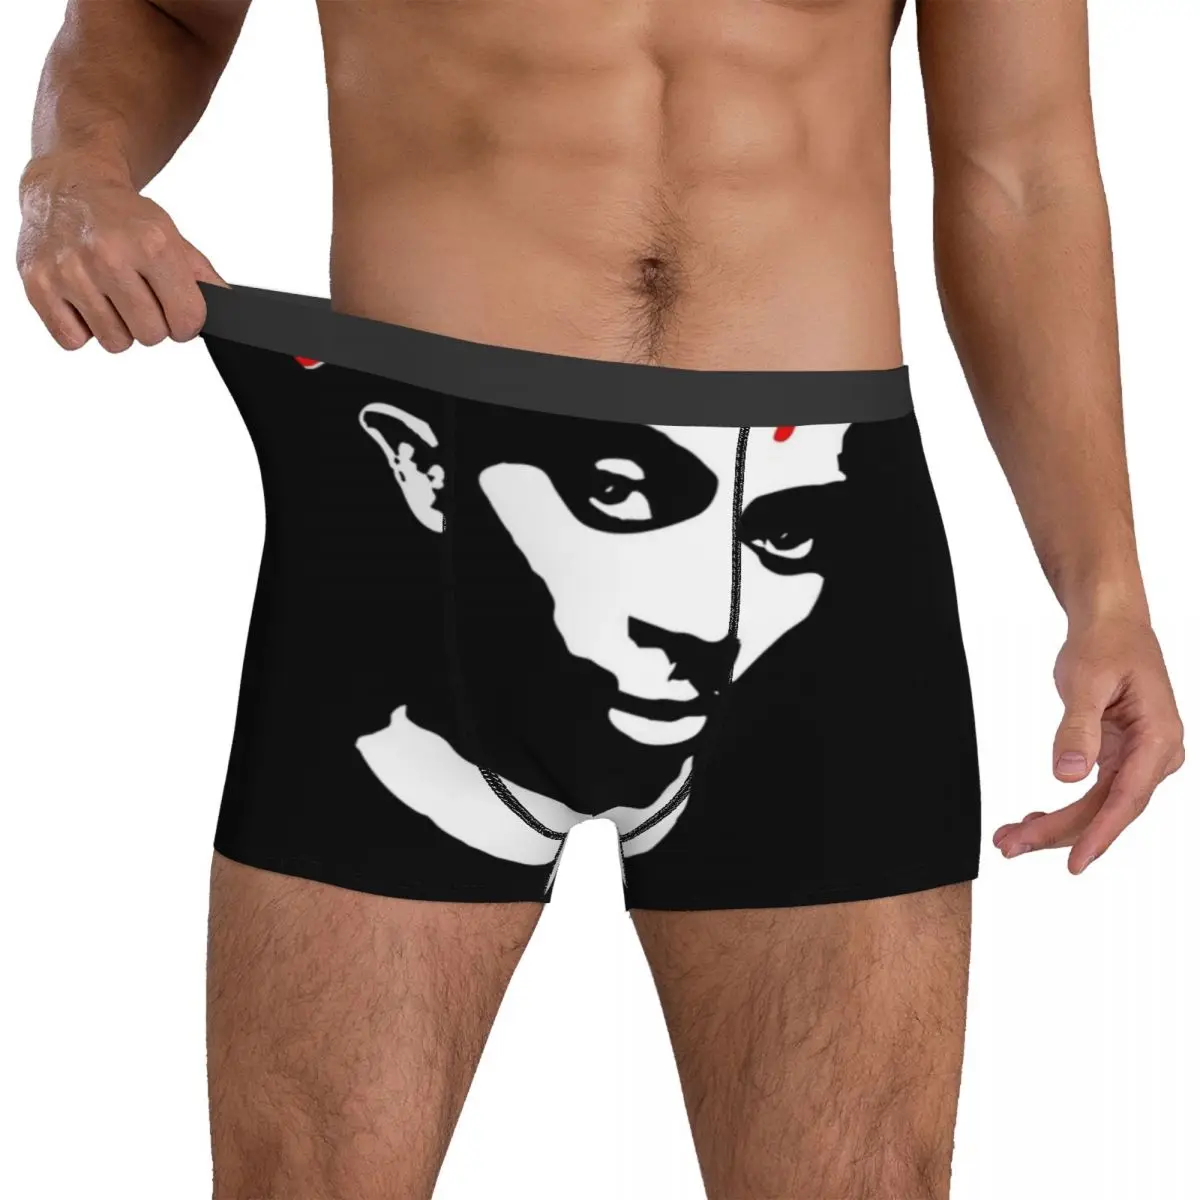 Whole Lotta Red Carti Underwear Playboi Carti Printing Boxershorts Hot Man  Underpants Breathable Shorts Briefs Gift - Boxers - AliExpress